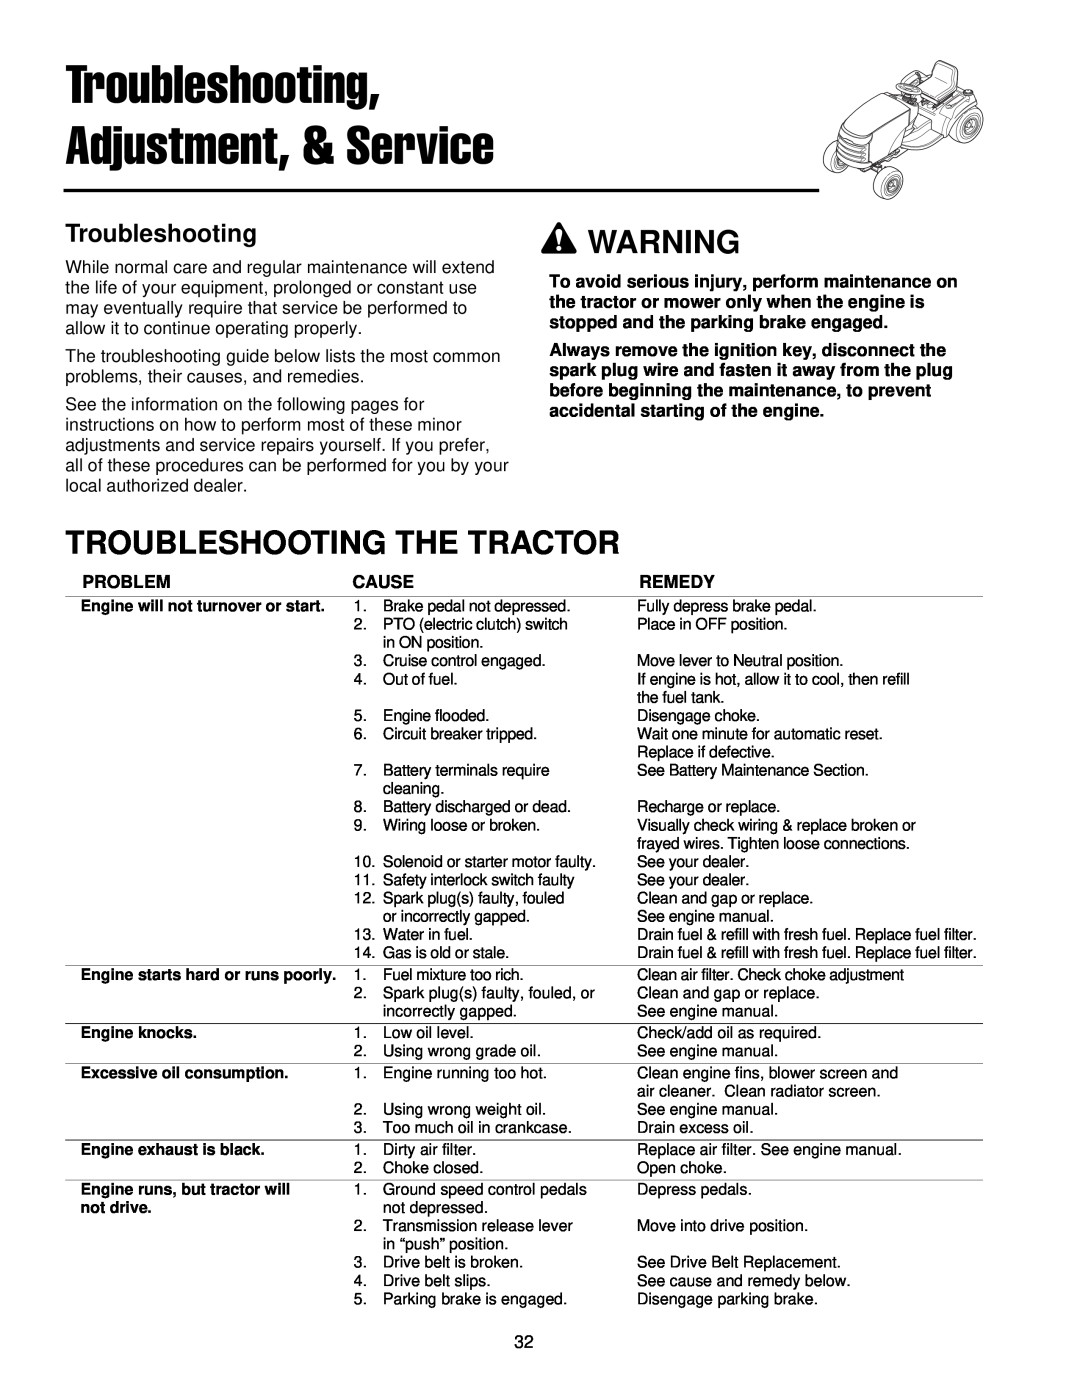 Simplicity 300 Series manual Troubleshooting Adjustment, & Service, Troubleshooting The Tractor 